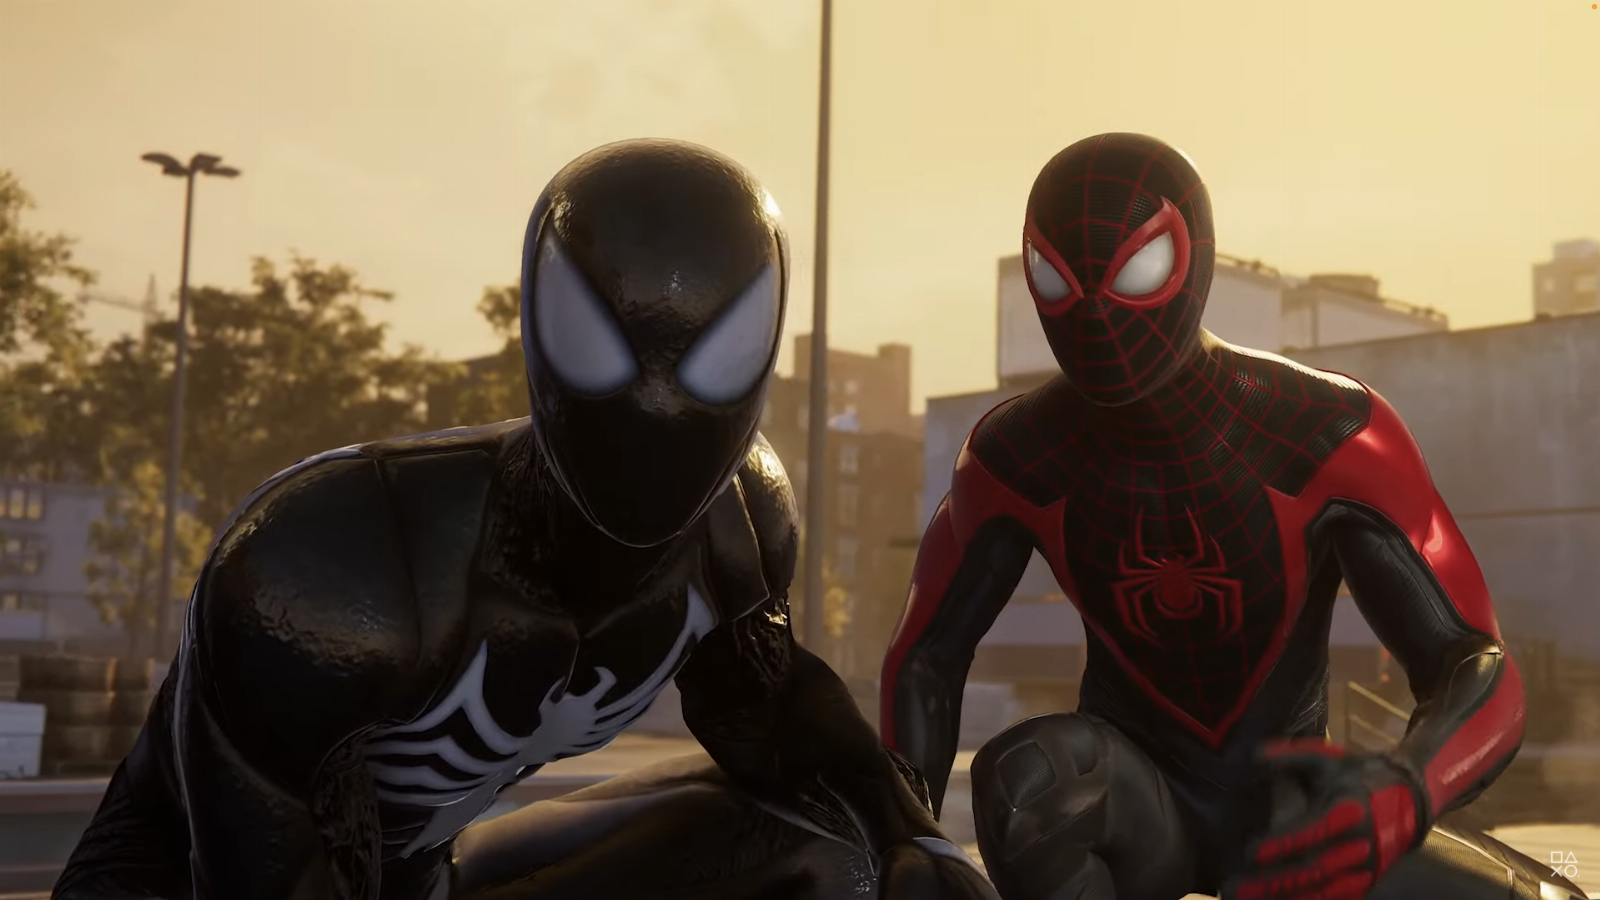 Marvel’s Spider-Man 2 features Miles with web wings and Peter in symbiote suit